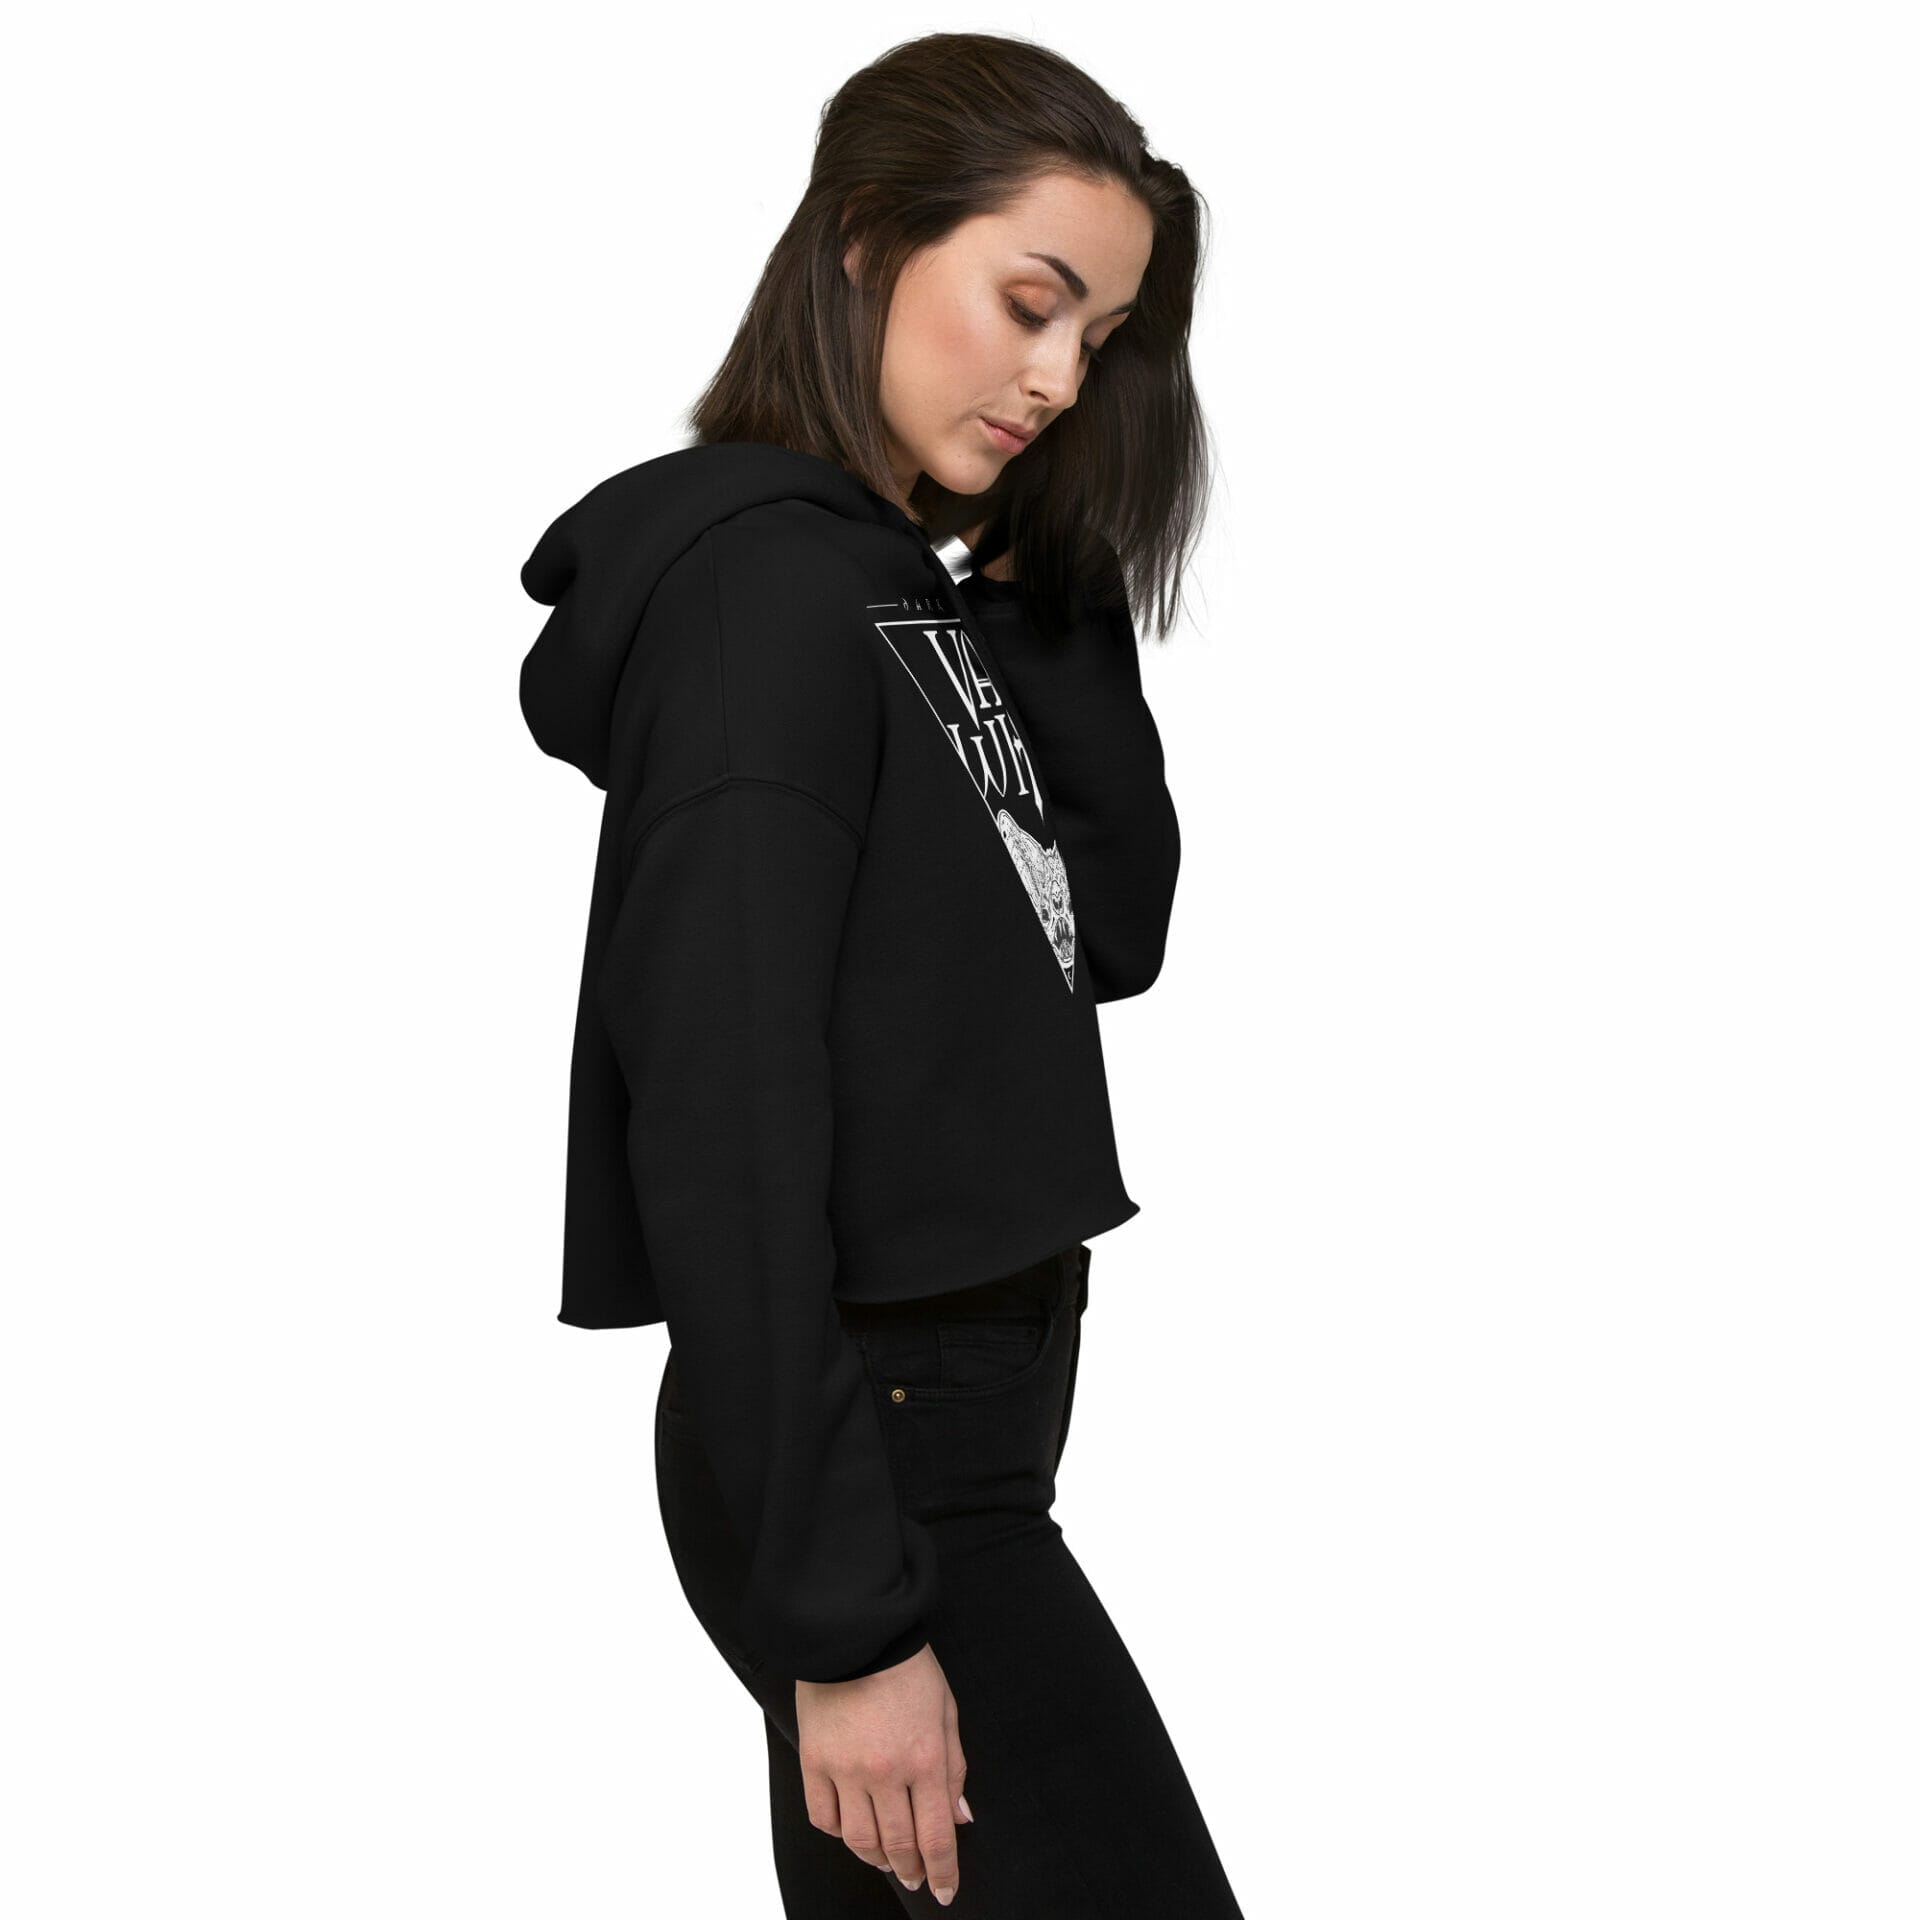 womens-cropped-hoodie-black-right-front-64908d2d52aee.jpg